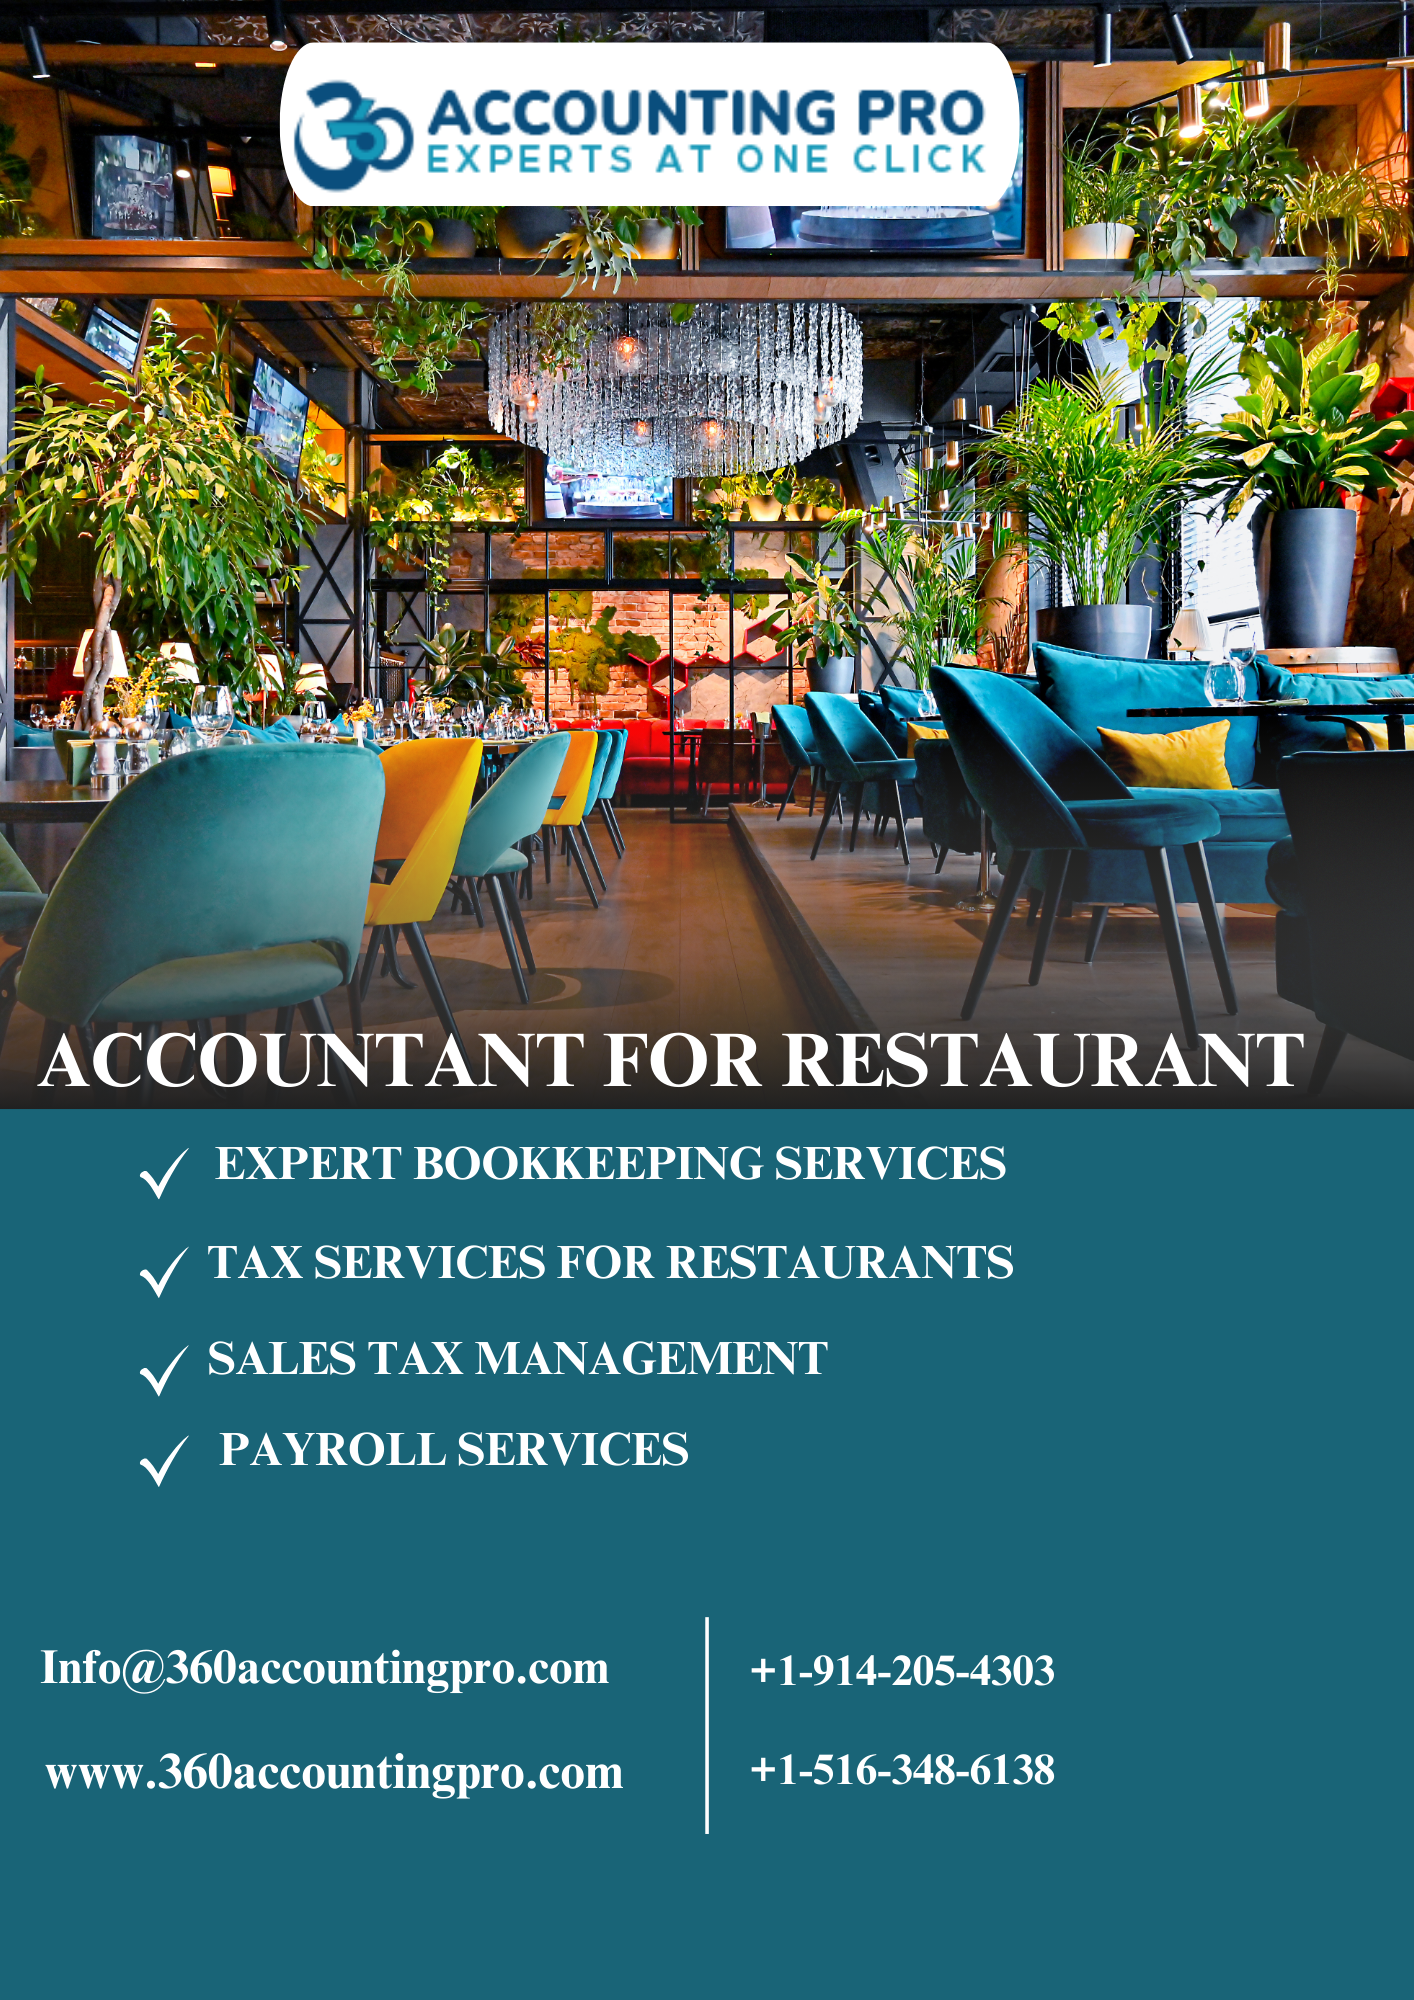 Accountant for Restaurant | Optimizing Restaurant Finances: Comprehensive Bookkeeping, Tax, and Payroll Services in the United States